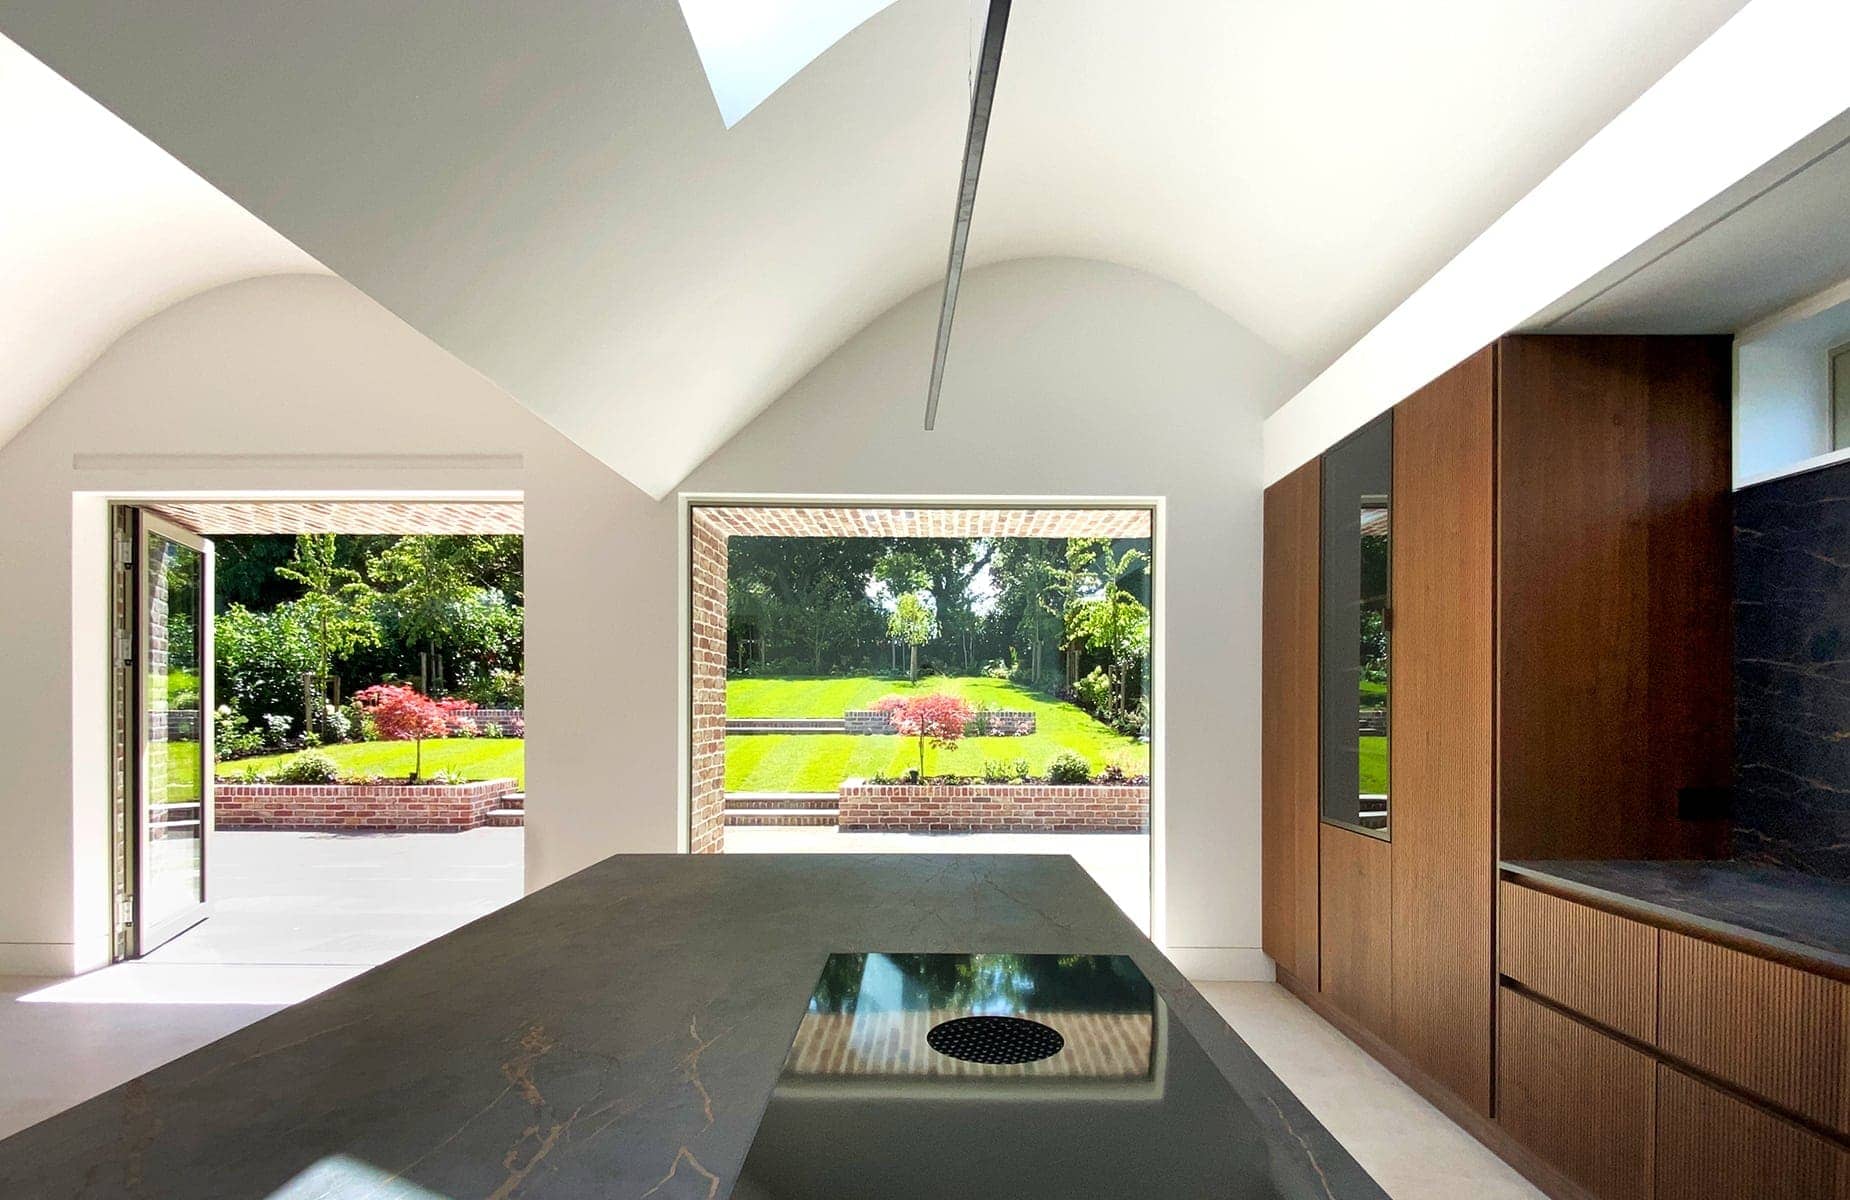 Spacious Dublin kitchen with garden view designed by architects